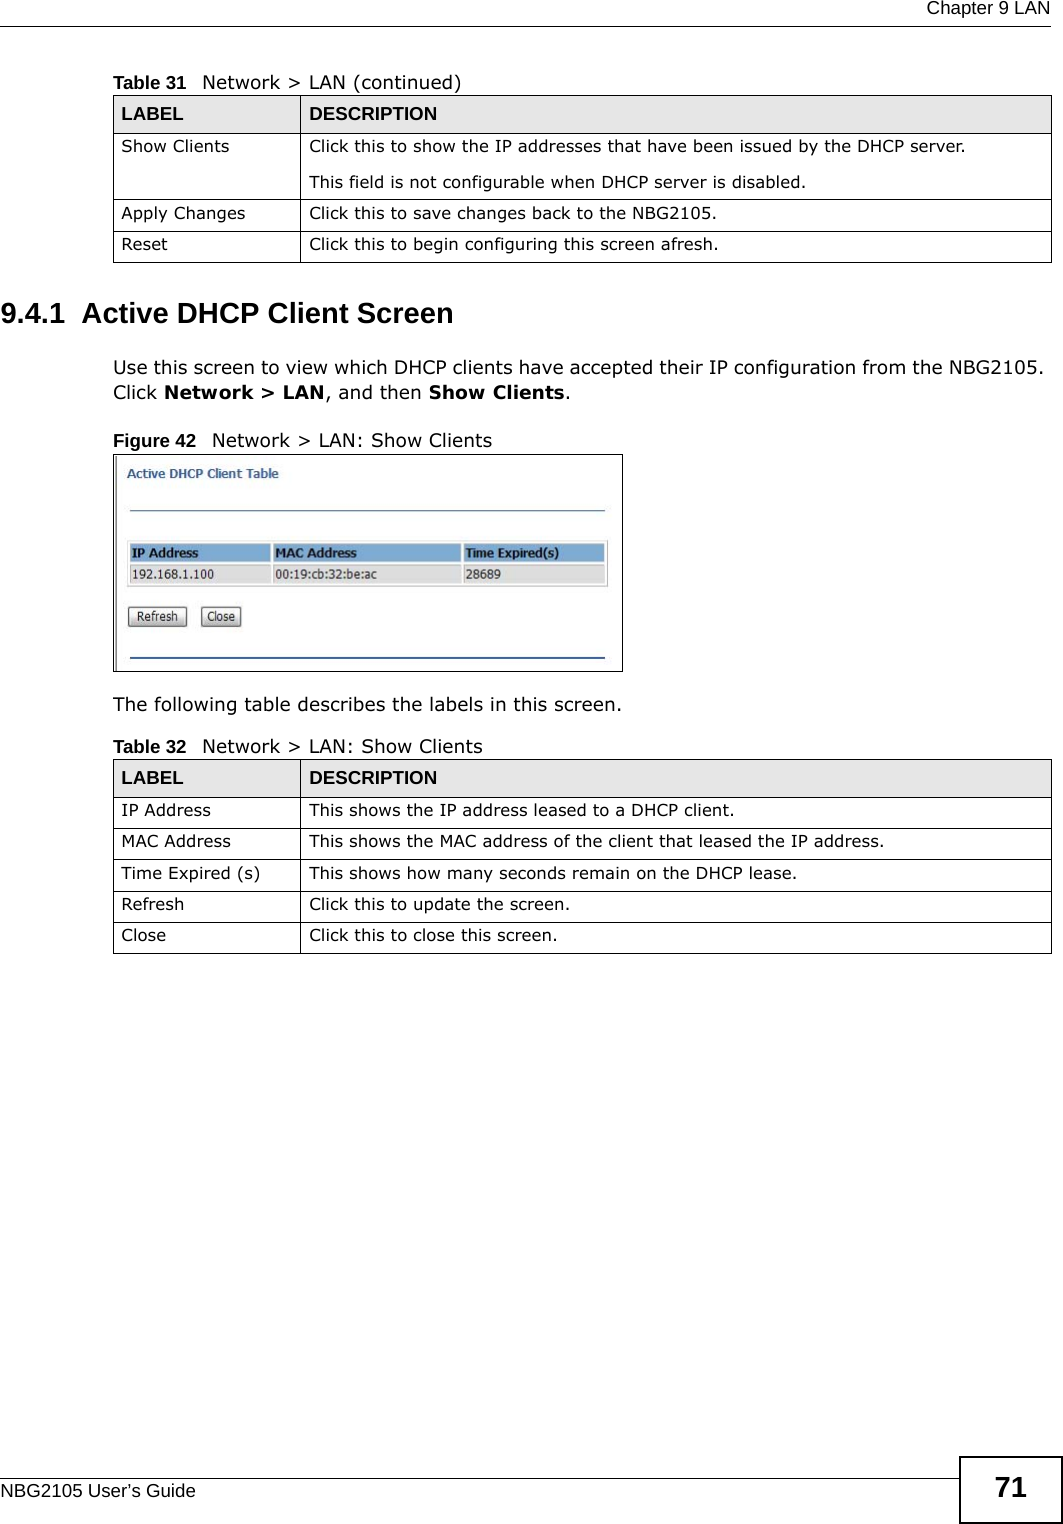  Chapter 9 LANNBG2105 User’s Guide 719.4.1  Active DHCP Client ScreenUse this screen to view which DHCP clients have accepted their IP configuration from the NBG2105. Click Network &gt; LAN, and then Show Clients.Figure 42   Network &gt; LAN: Show Clients The following table describes the labels in this screen.Show Clients Click this to show the IP addresses that have been issued by the DHCP server.This field is not configurable when DHCP server is disabled.Apply Changes Click this to save changes back to the NBG2105.Reset Click this to begin configuring this screen afresh.Table 31   Network &gt; LAN (continued)LABEL DESCRIPTIONTable 32   Network &gt; LAN: Show ClientsLABEL DESCRIPTIONIP Address This shows the IP address leased to a DHCP client.MAC Address This shows the MAC address of the client that leased the IP address.Time Expired (s) This shows how many seconds remain on the DHCP lease.Refresh Click this to update the screen.Close  Click this to close this screen.